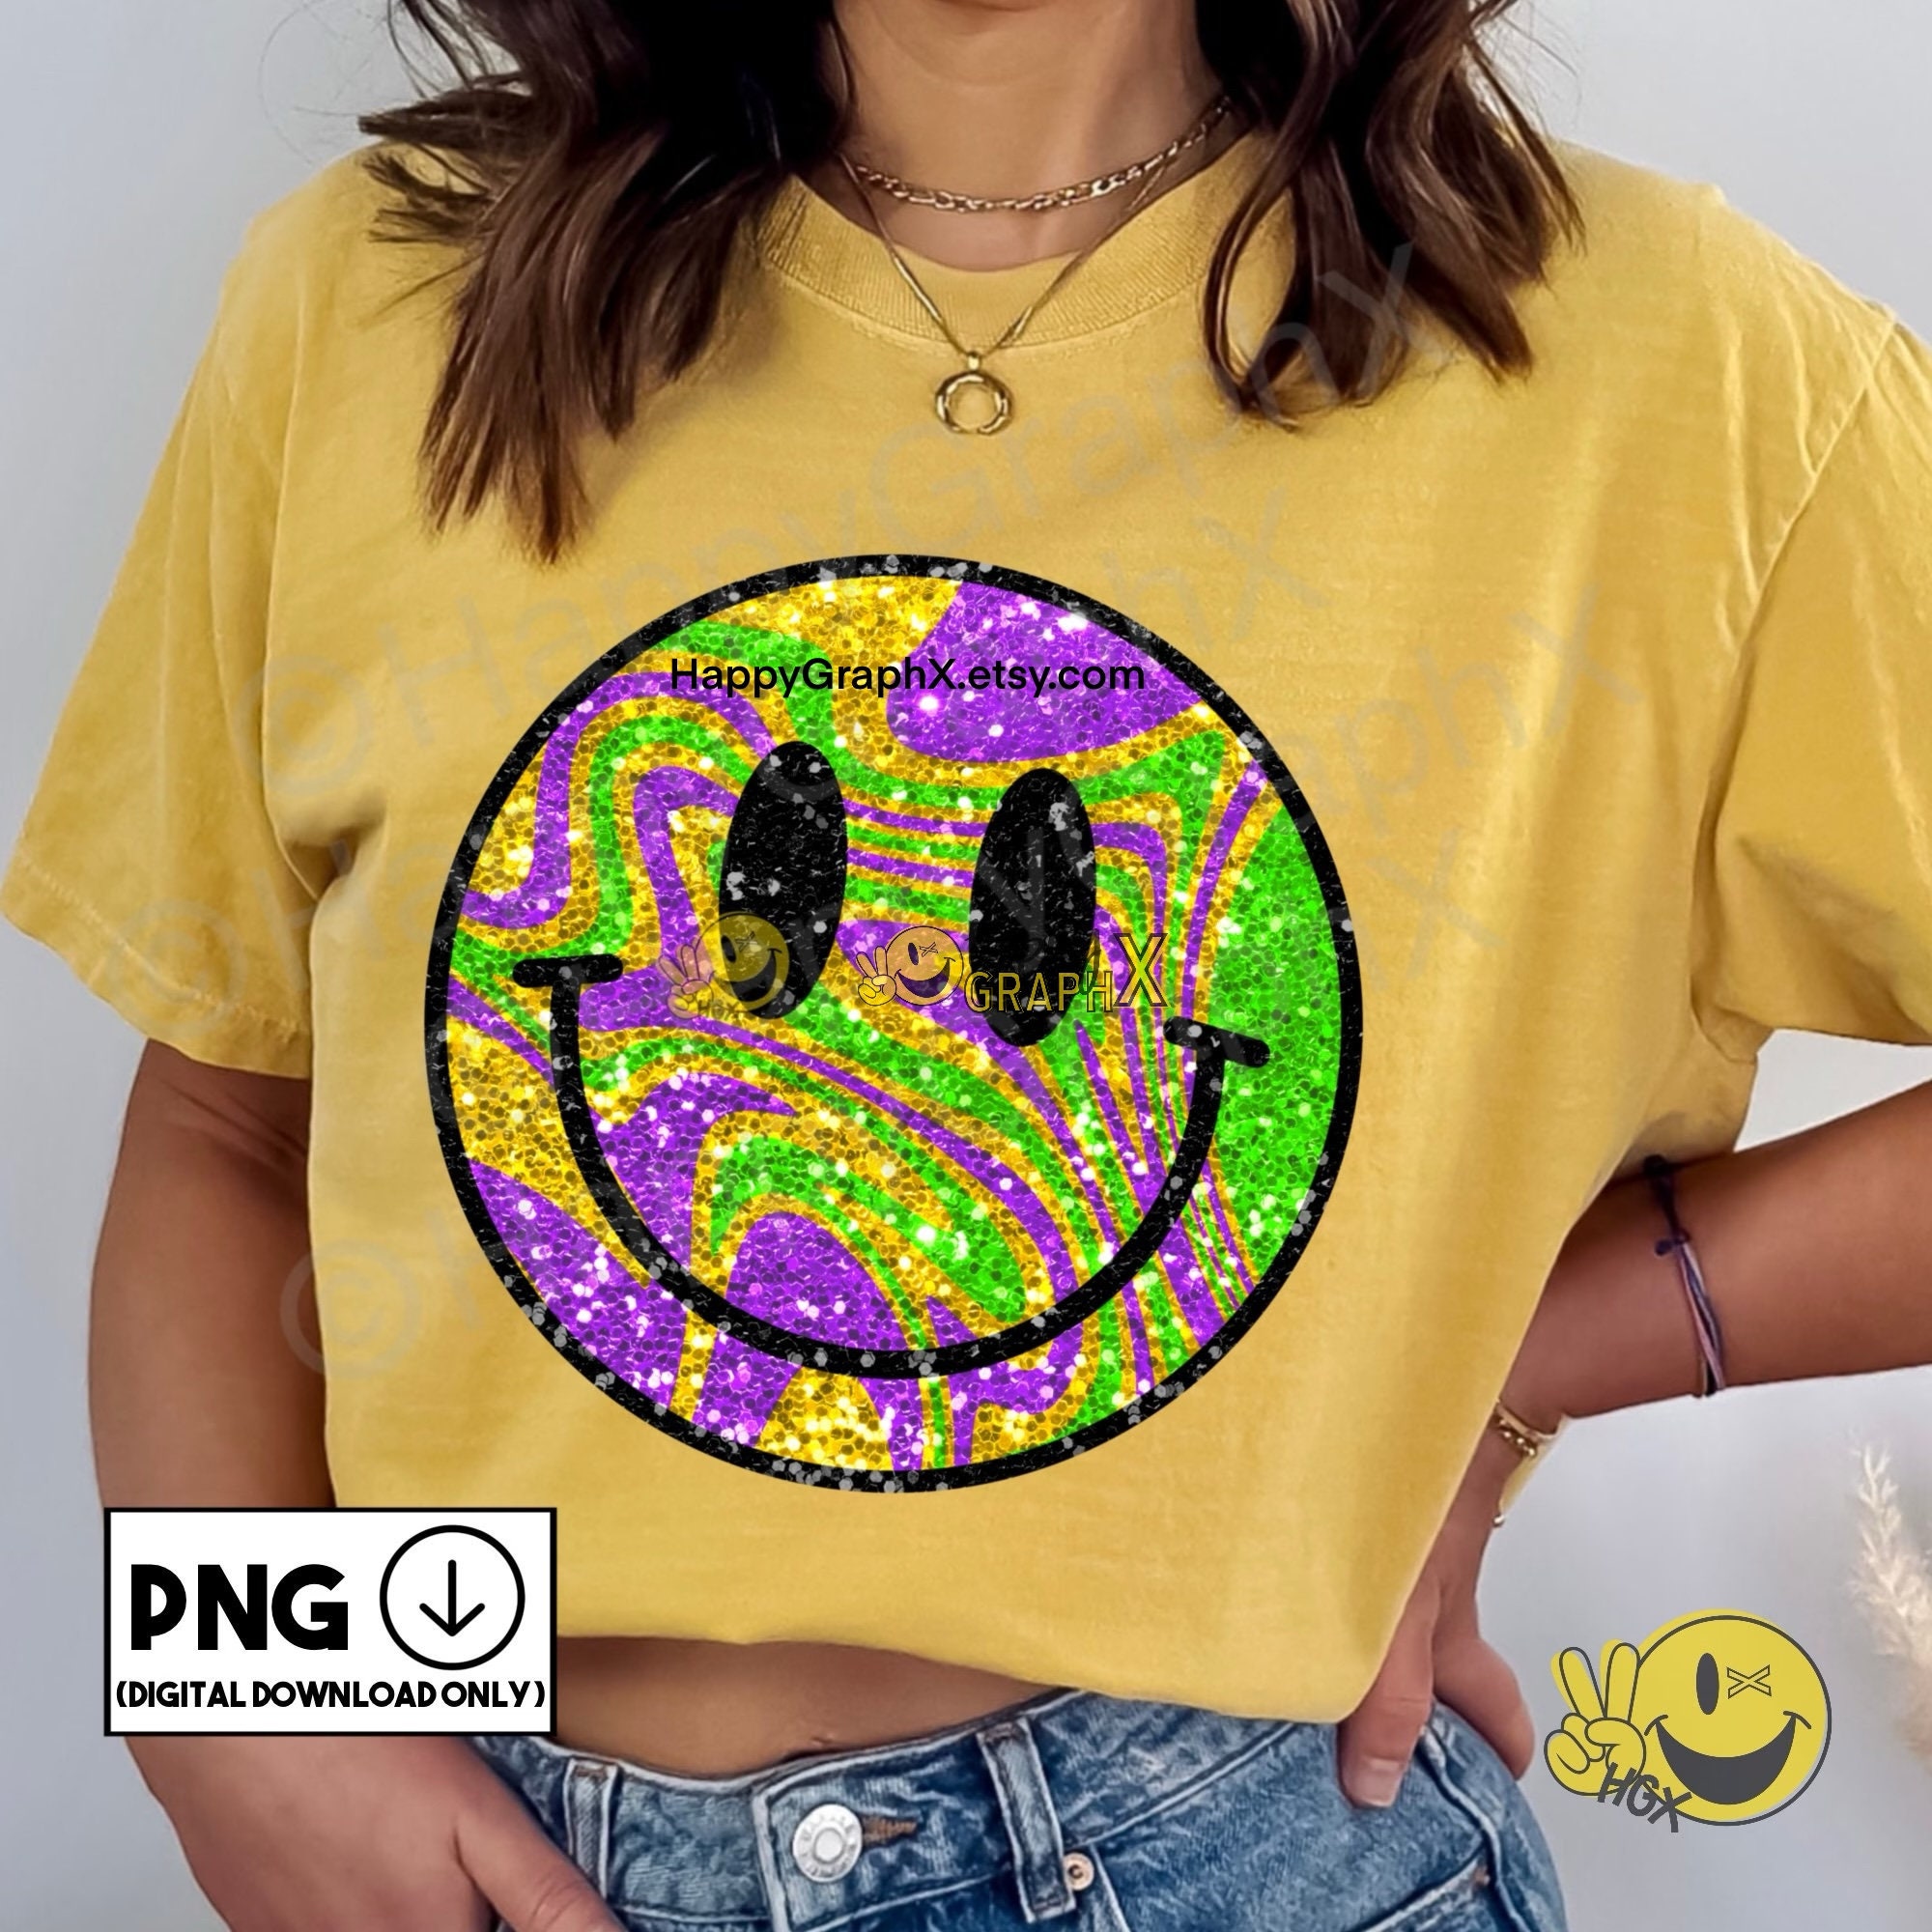 Smiley Face Patch – Basics Clothing Store